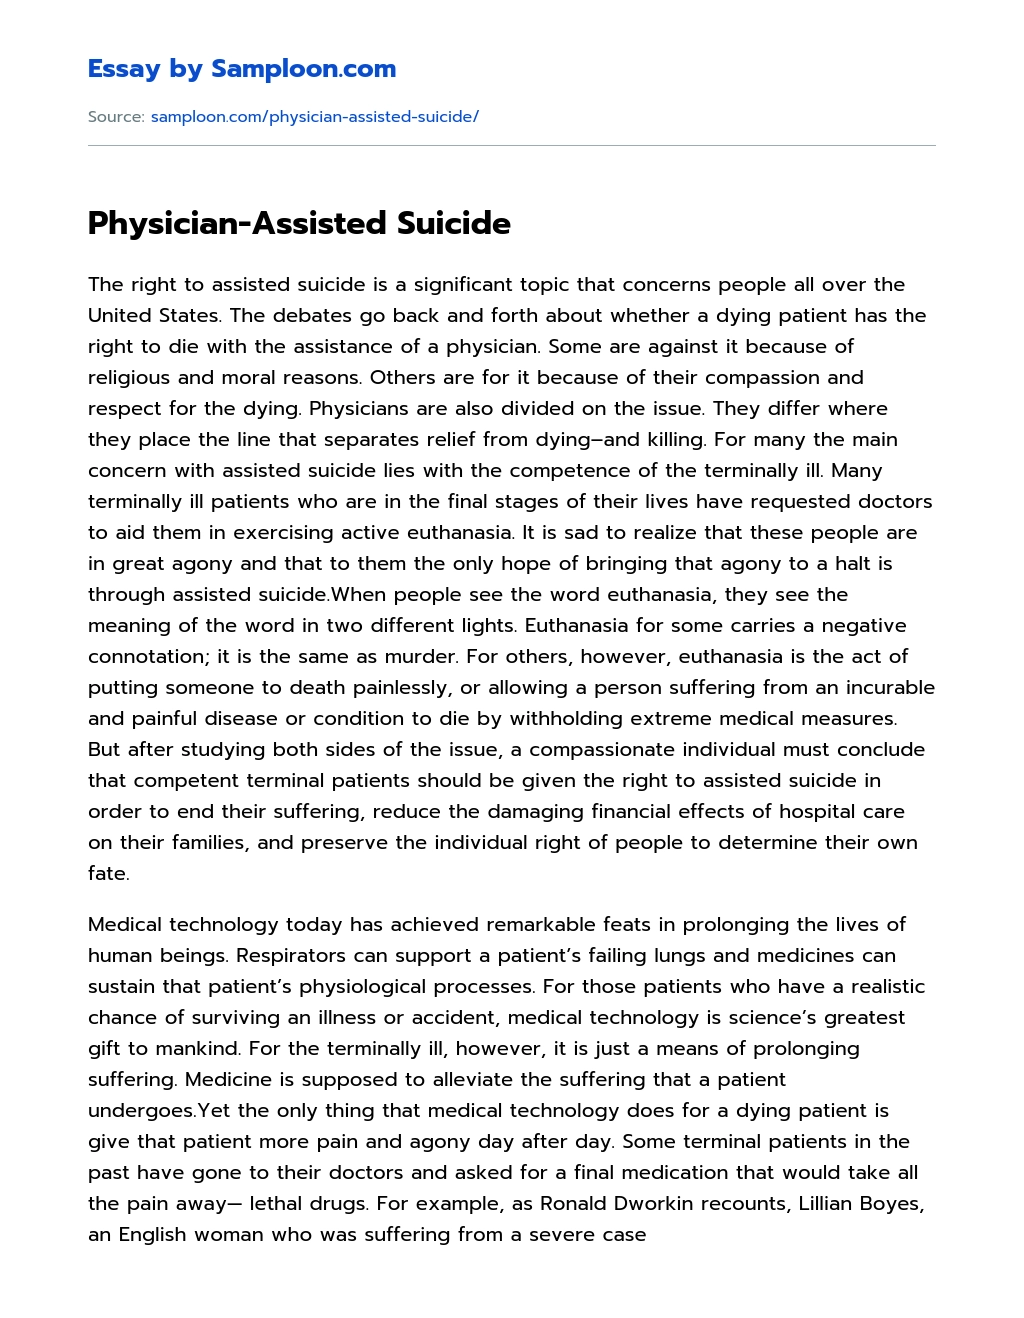 thesis statement for physician assisted suicide